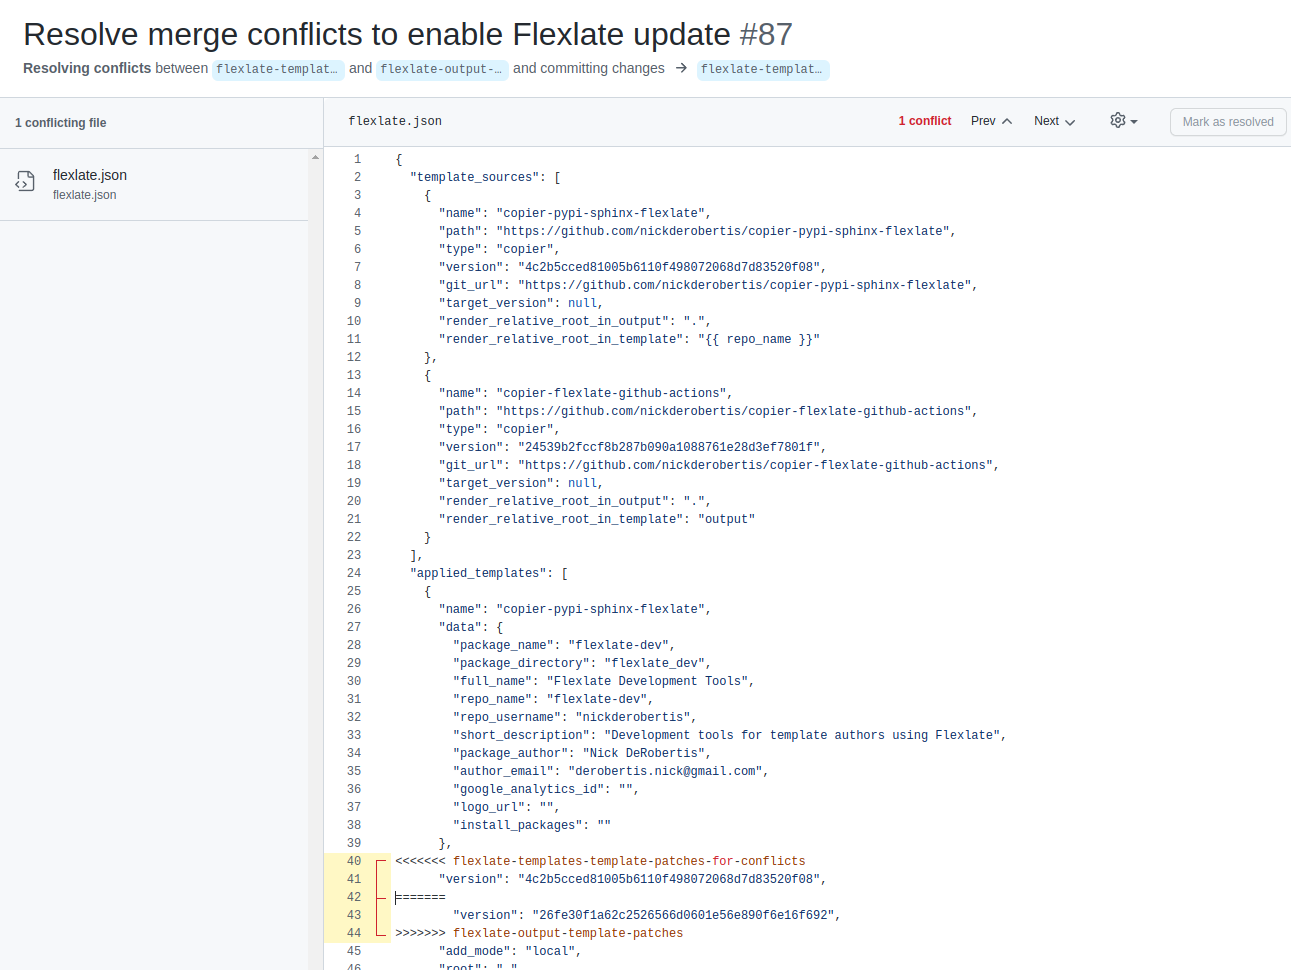 The Github UI to resolve merge conflicts